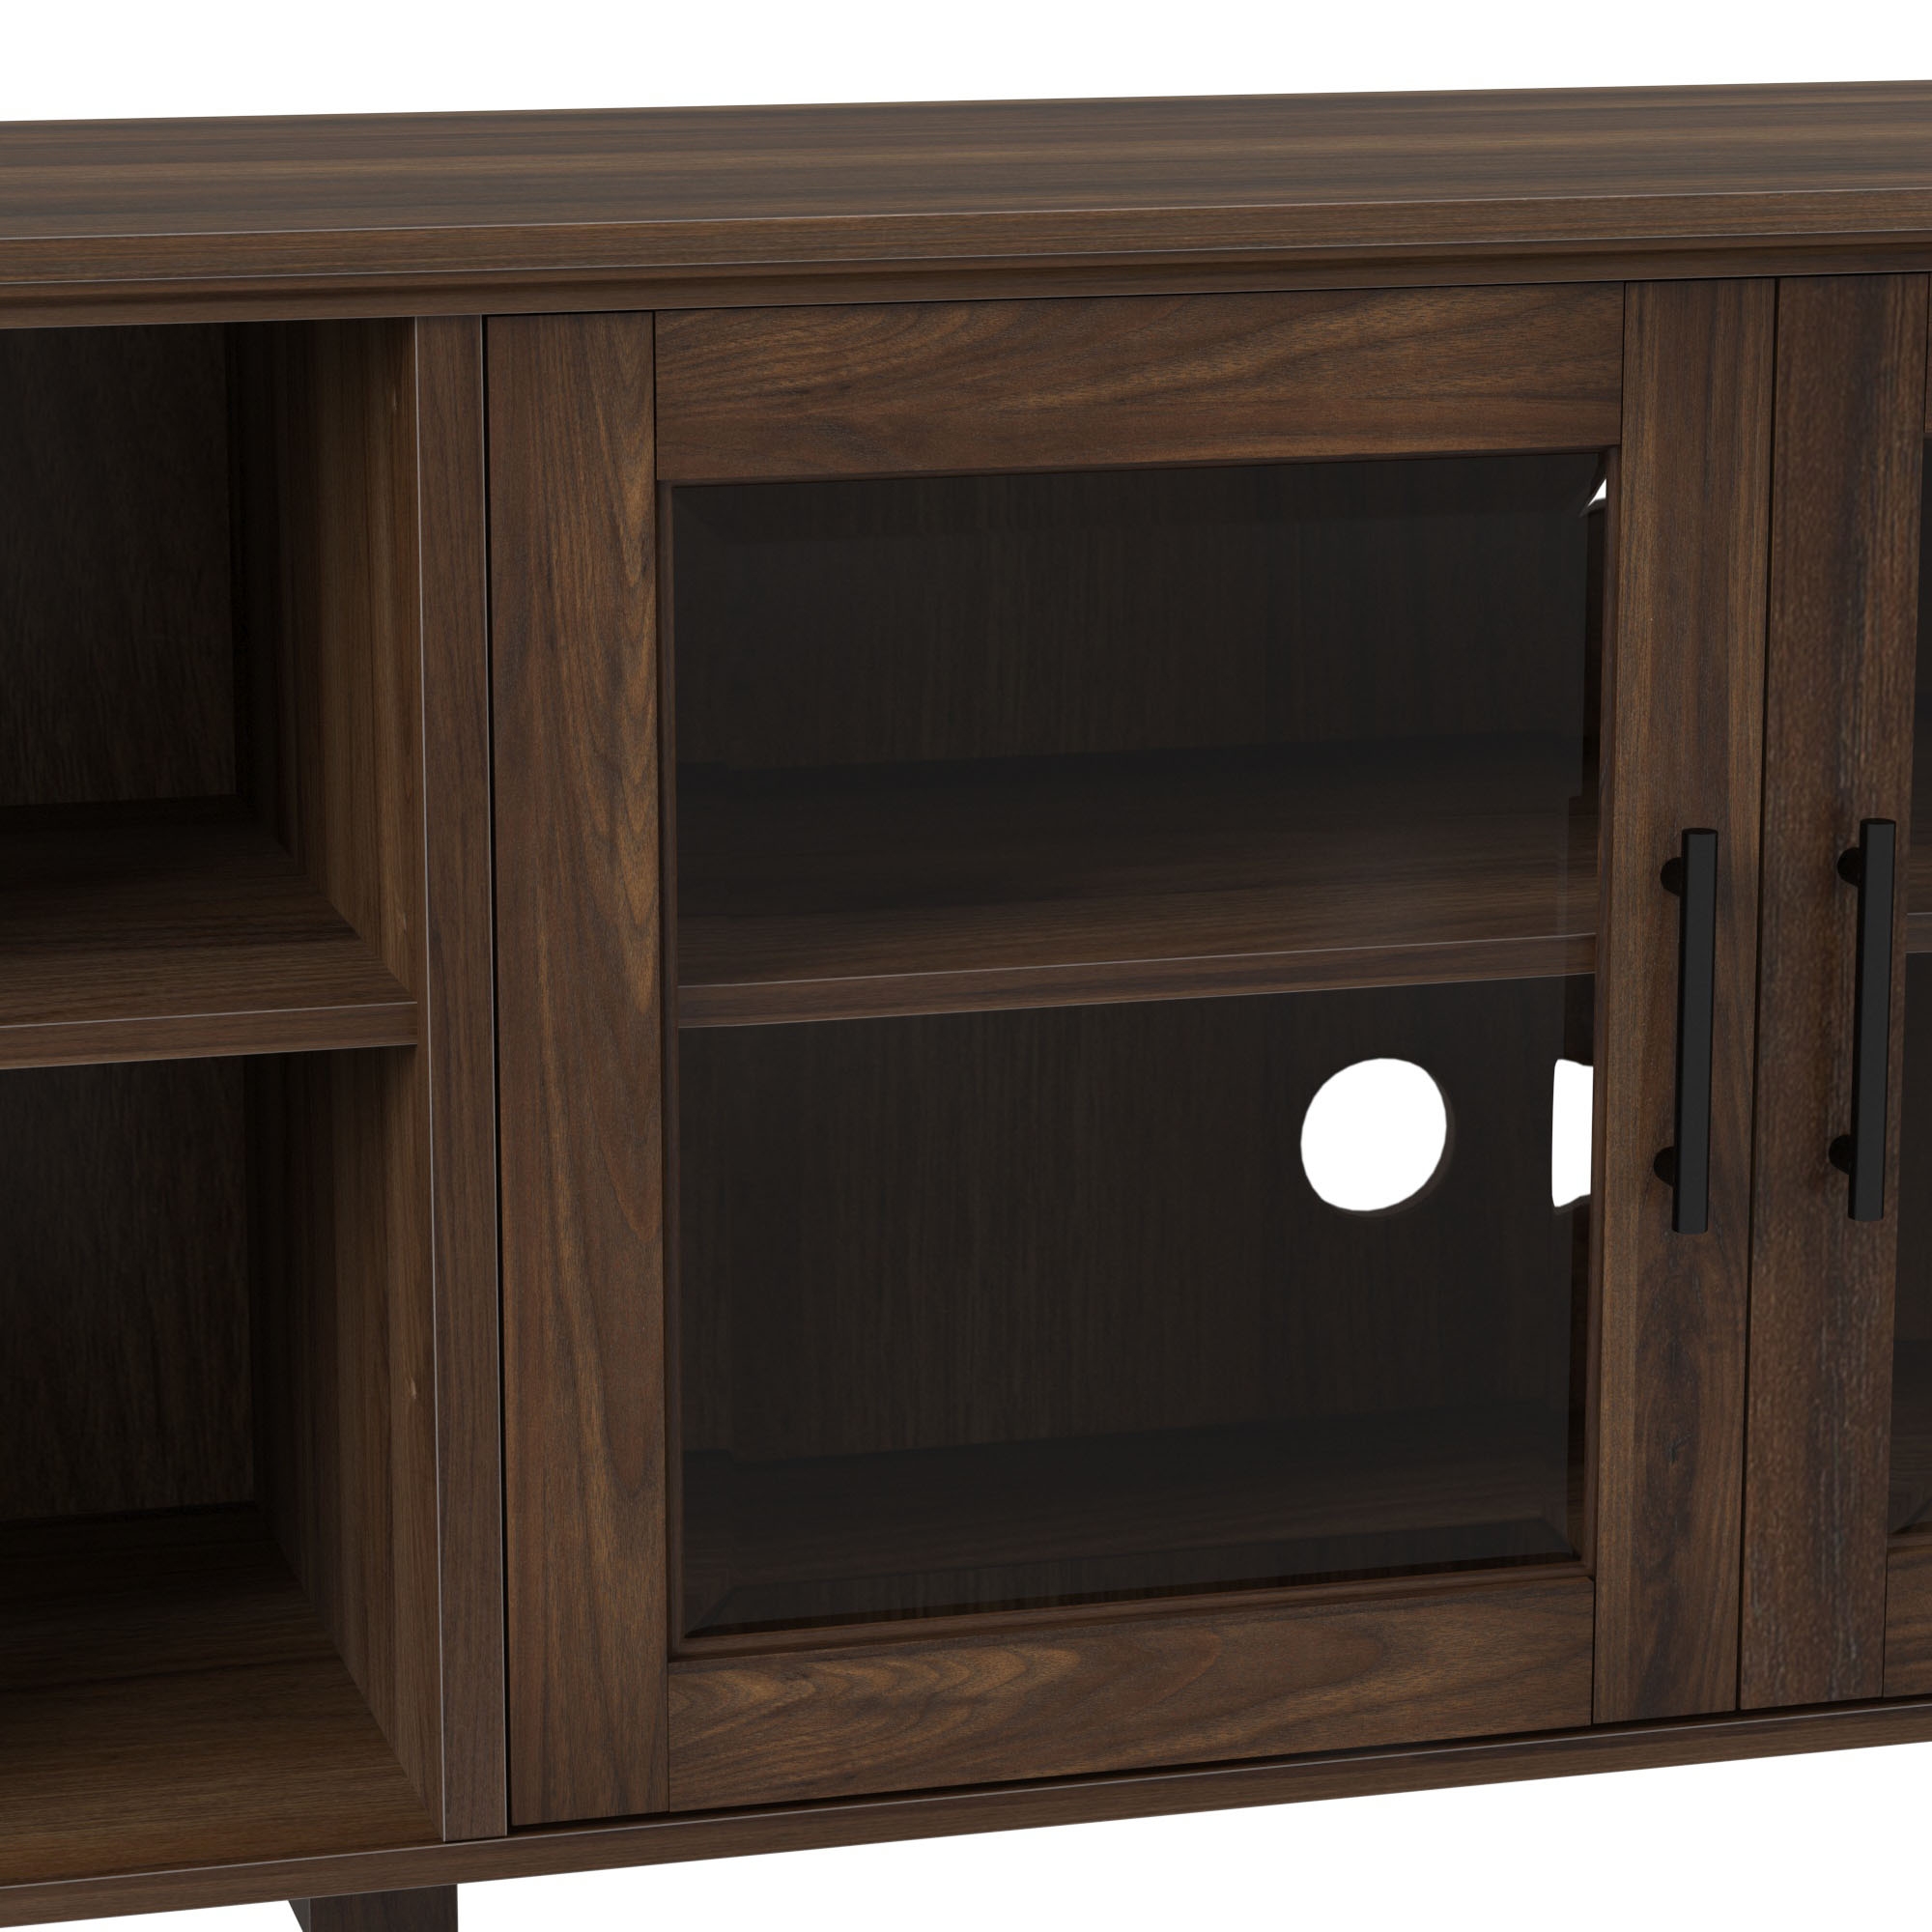 Columbus 58" TV Stand with Middle Doors - Dark Walnut - Image 5